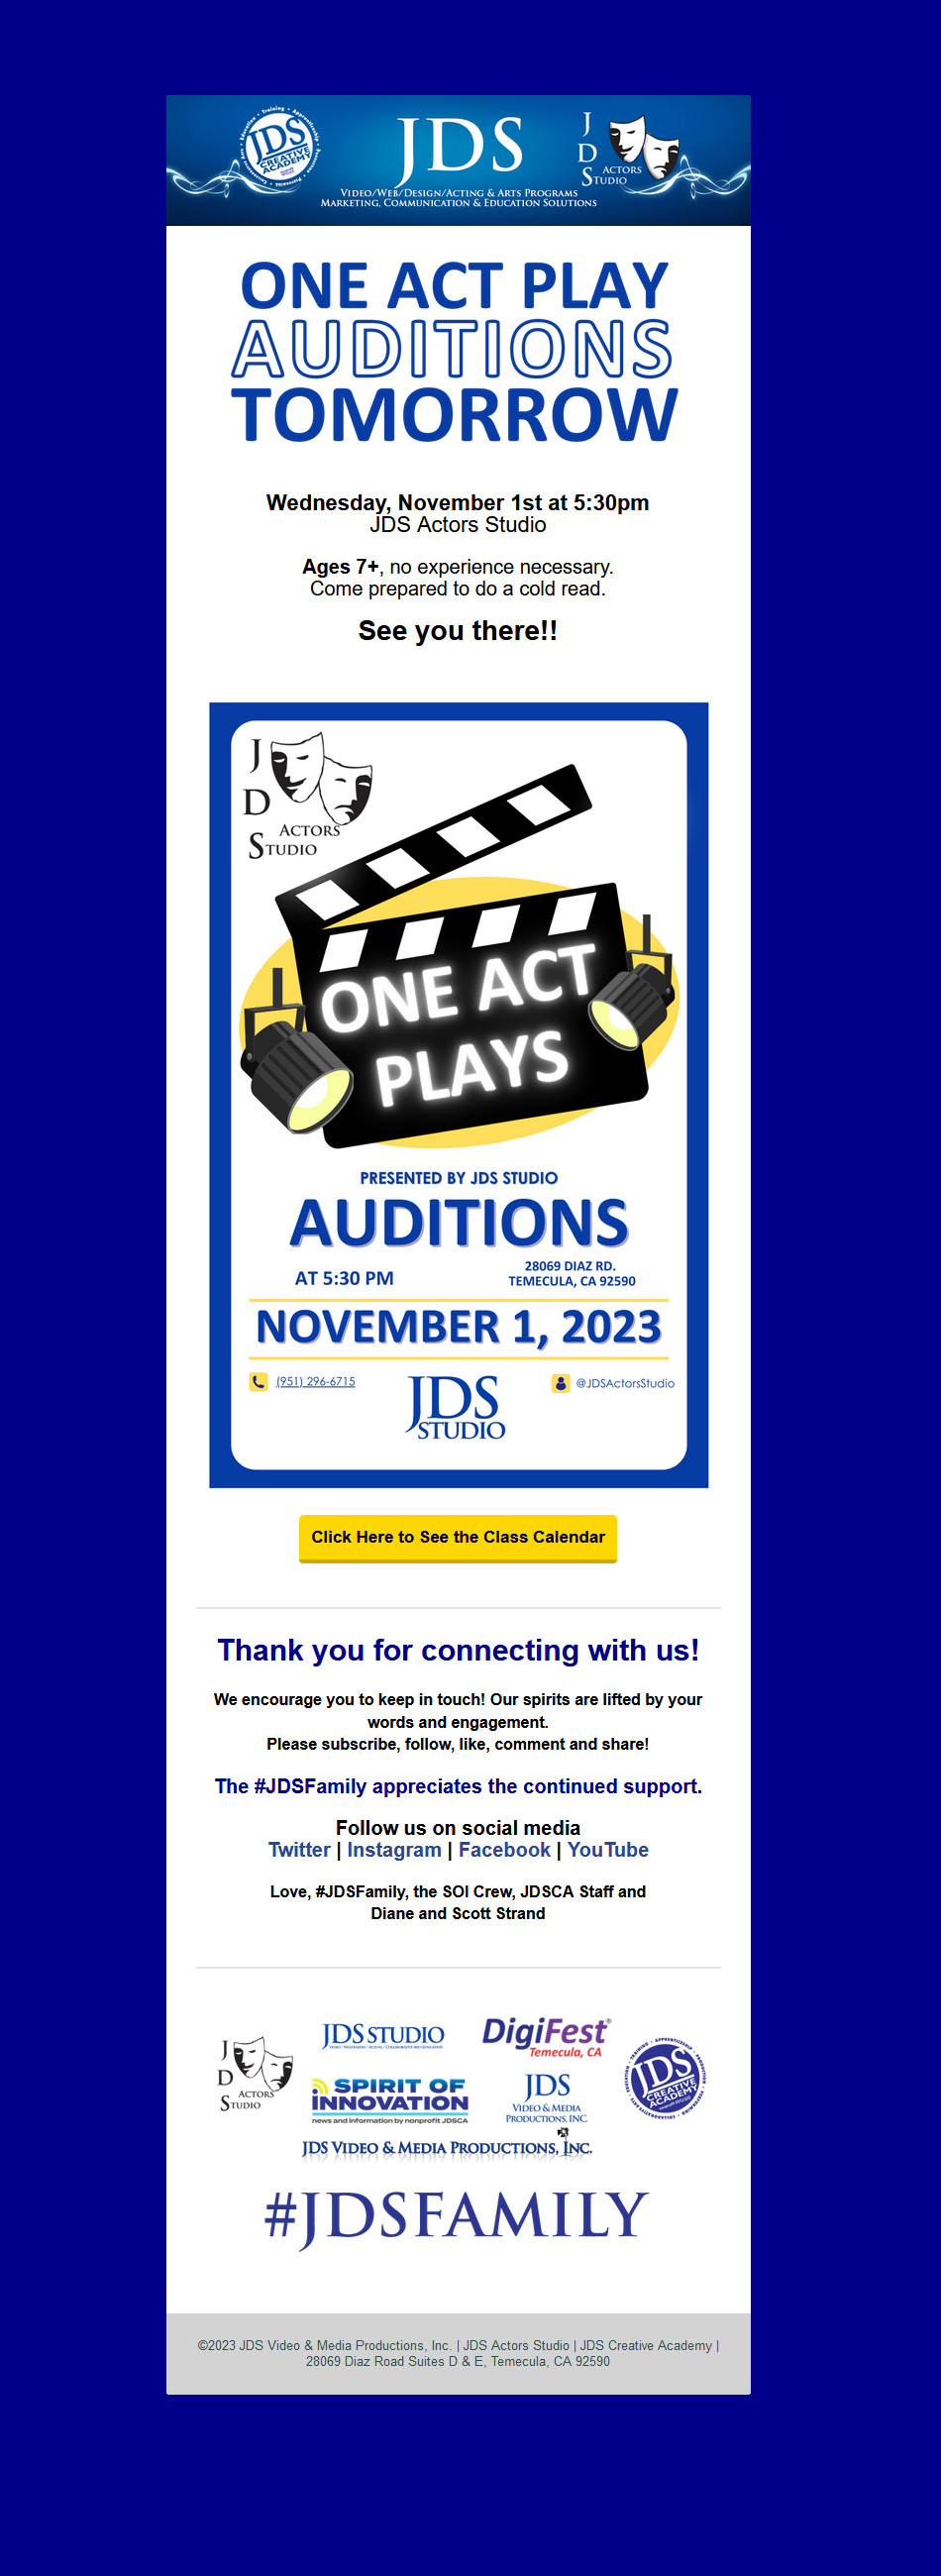 One Act Play Auditions TOMORROW! #JDSFamily